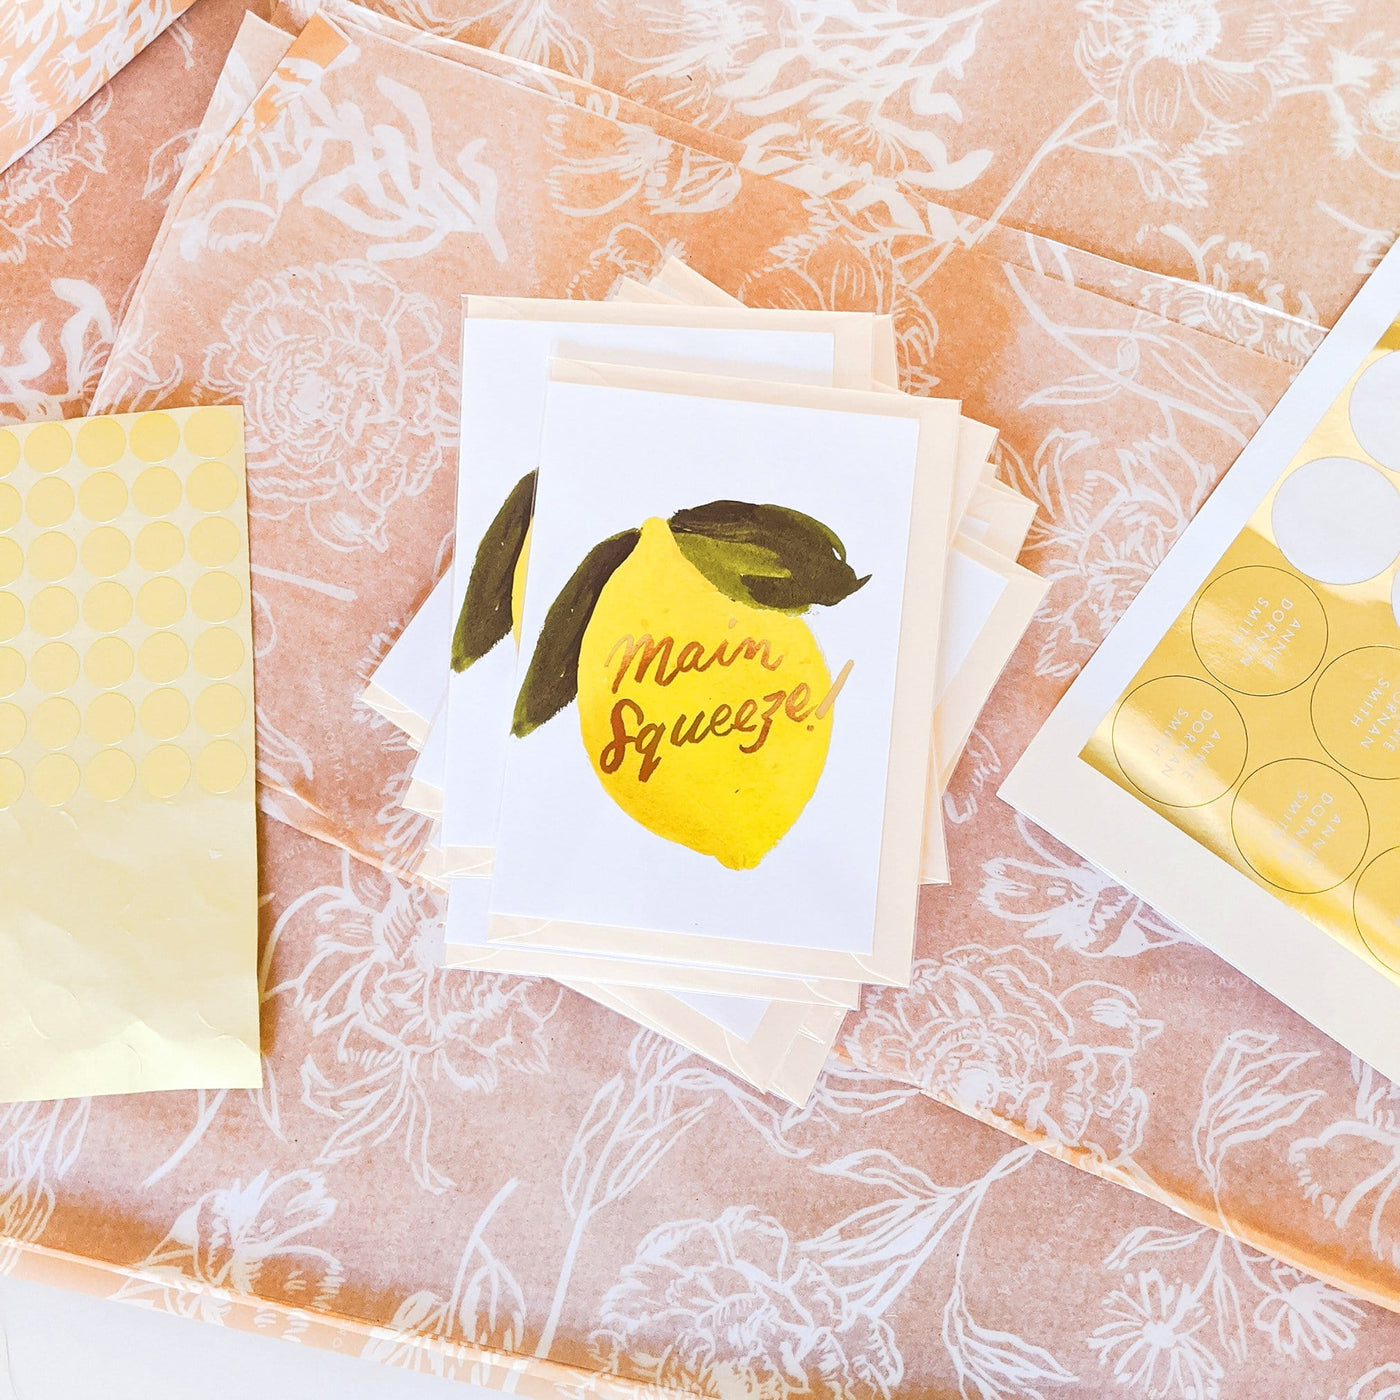 Illustrated Lemon and Green Leaf A6 Card With Main Squeeze In Gold Lettering With Pale Yellow Envelope On Patterned Tissue Paper - Annie Dornan Smith